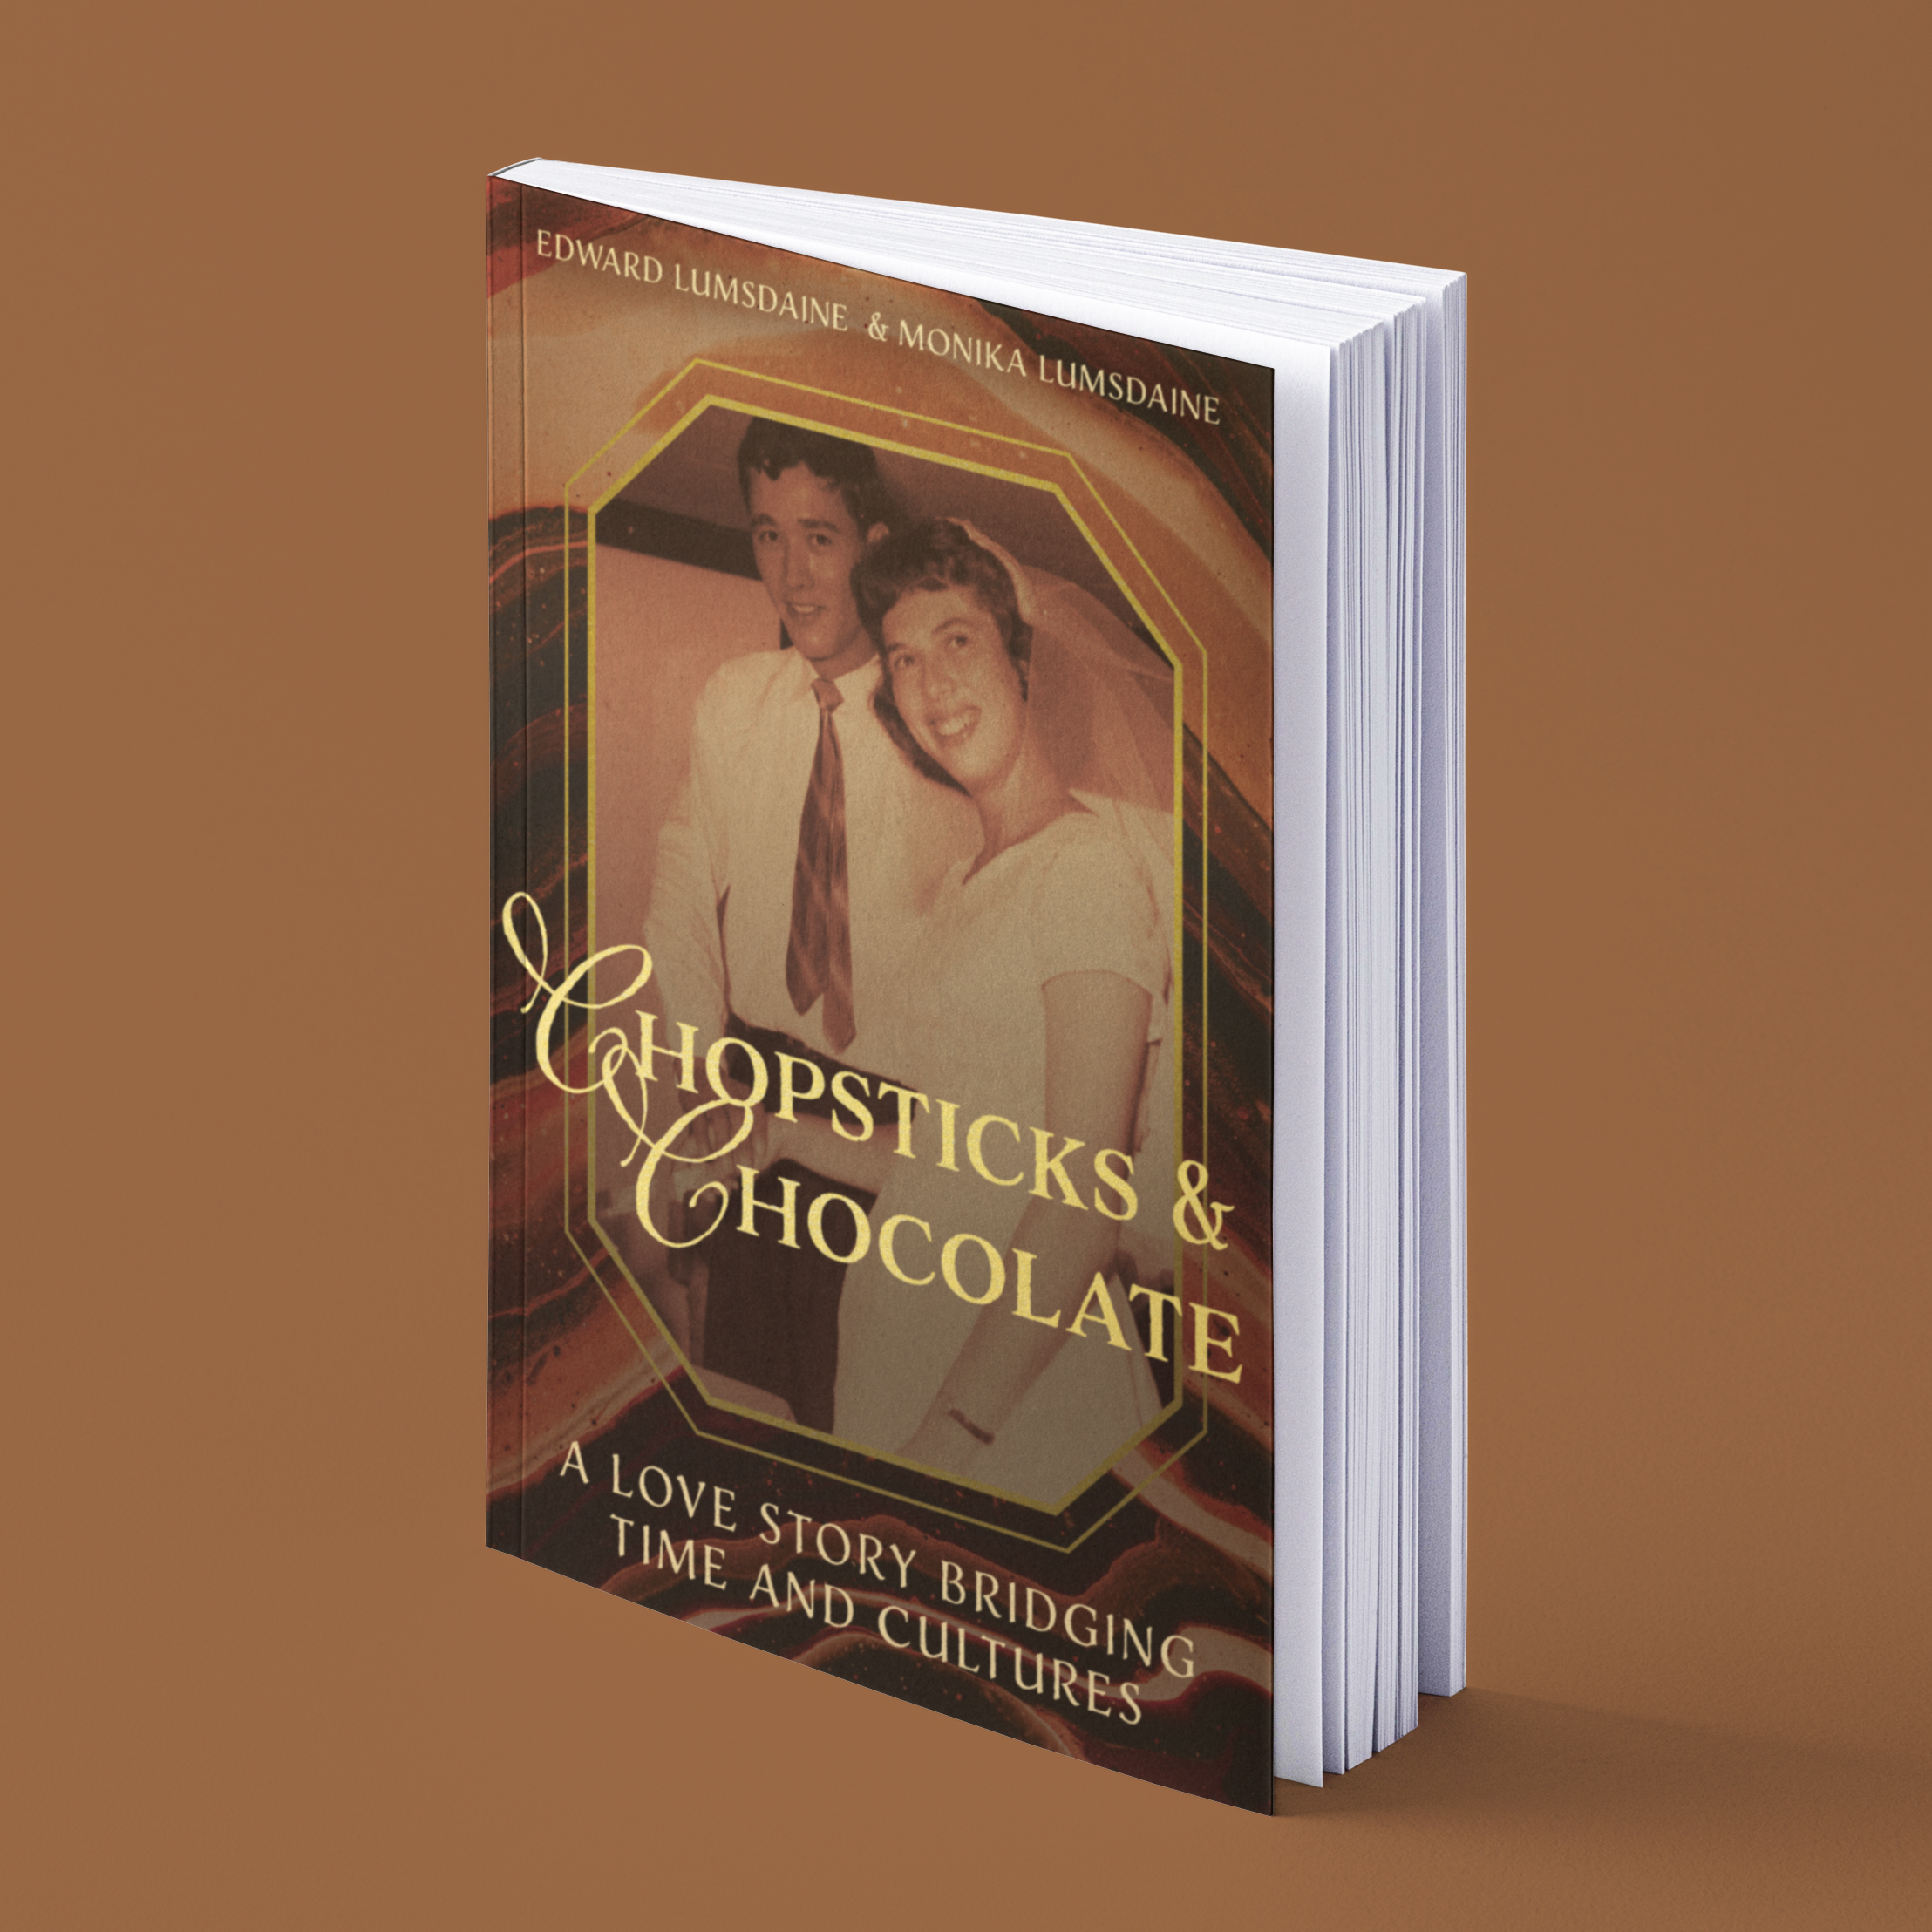 Chopstick and Chocolate: A Love Story Bridging Time and Cultures, by Edward Lumsdaine and Monika Lumsdaine